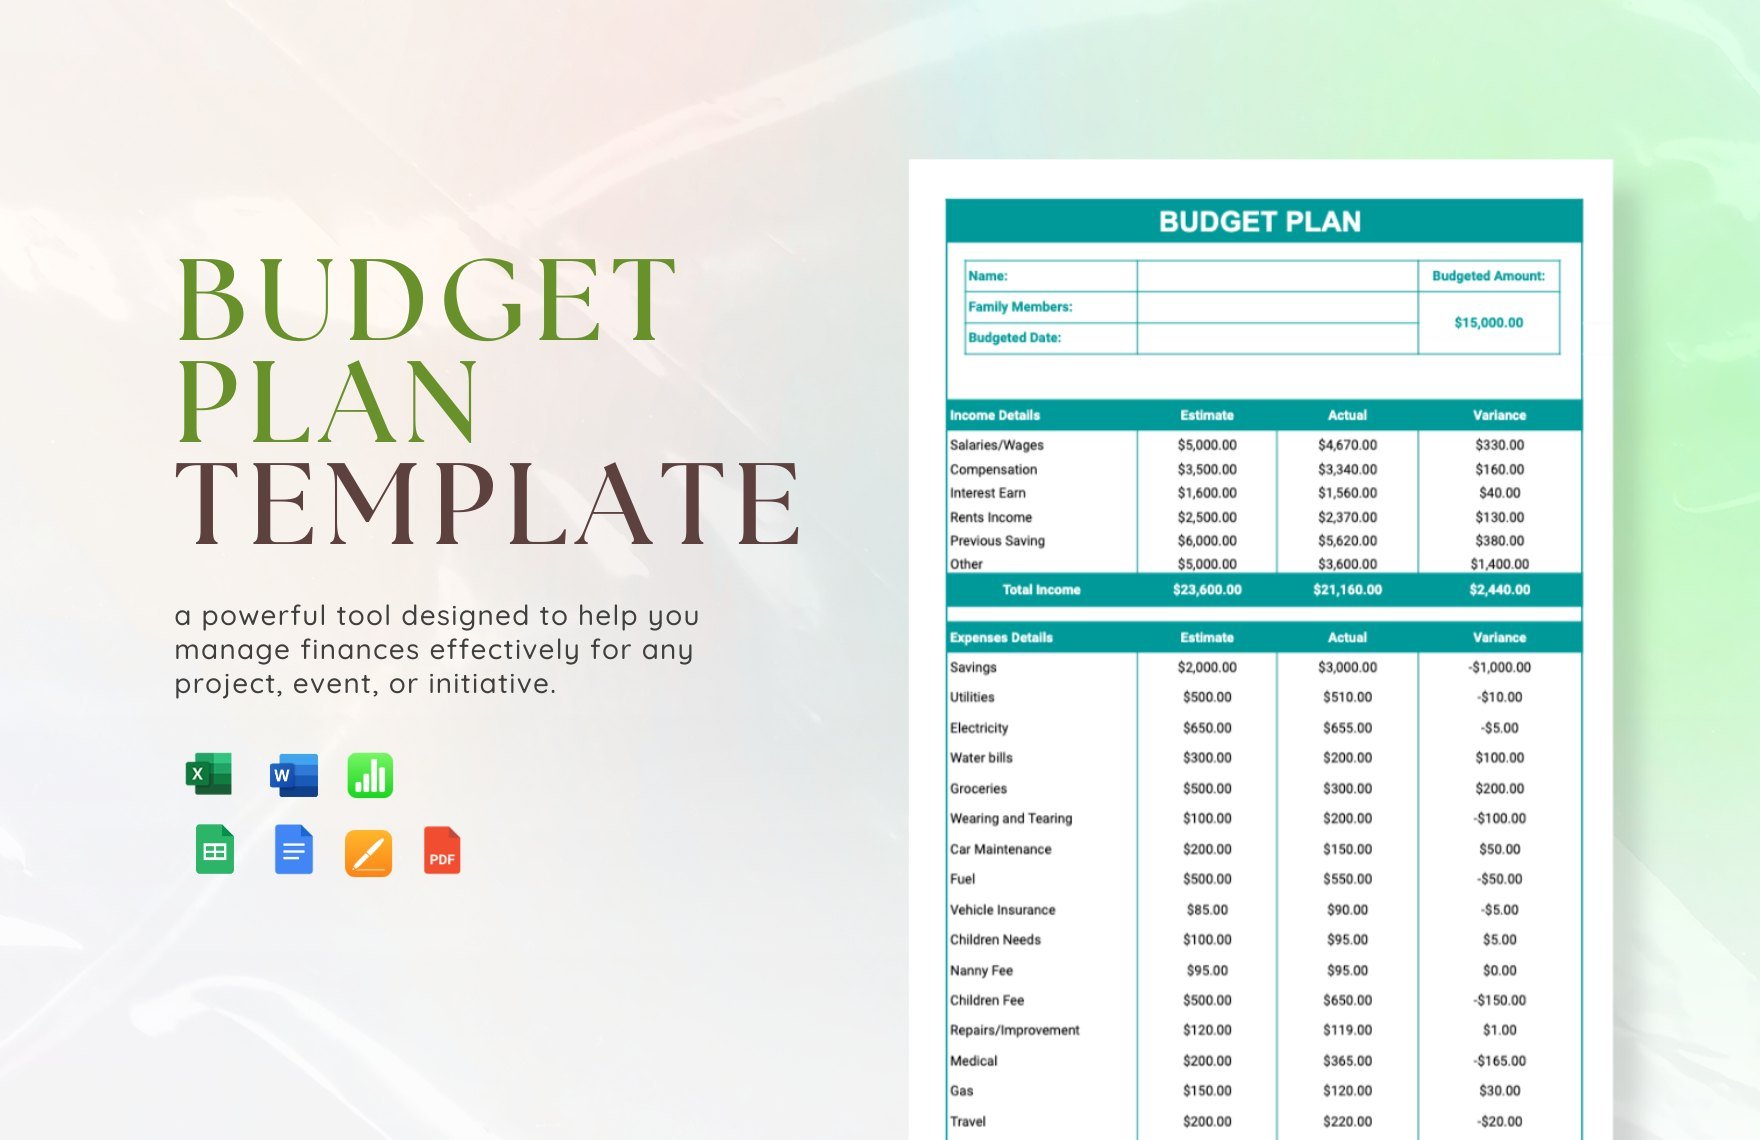 Budget Plan Template in Word, Google Docs, Excel, PDF, Google Sheets, Apple Pages, Apple Numbers